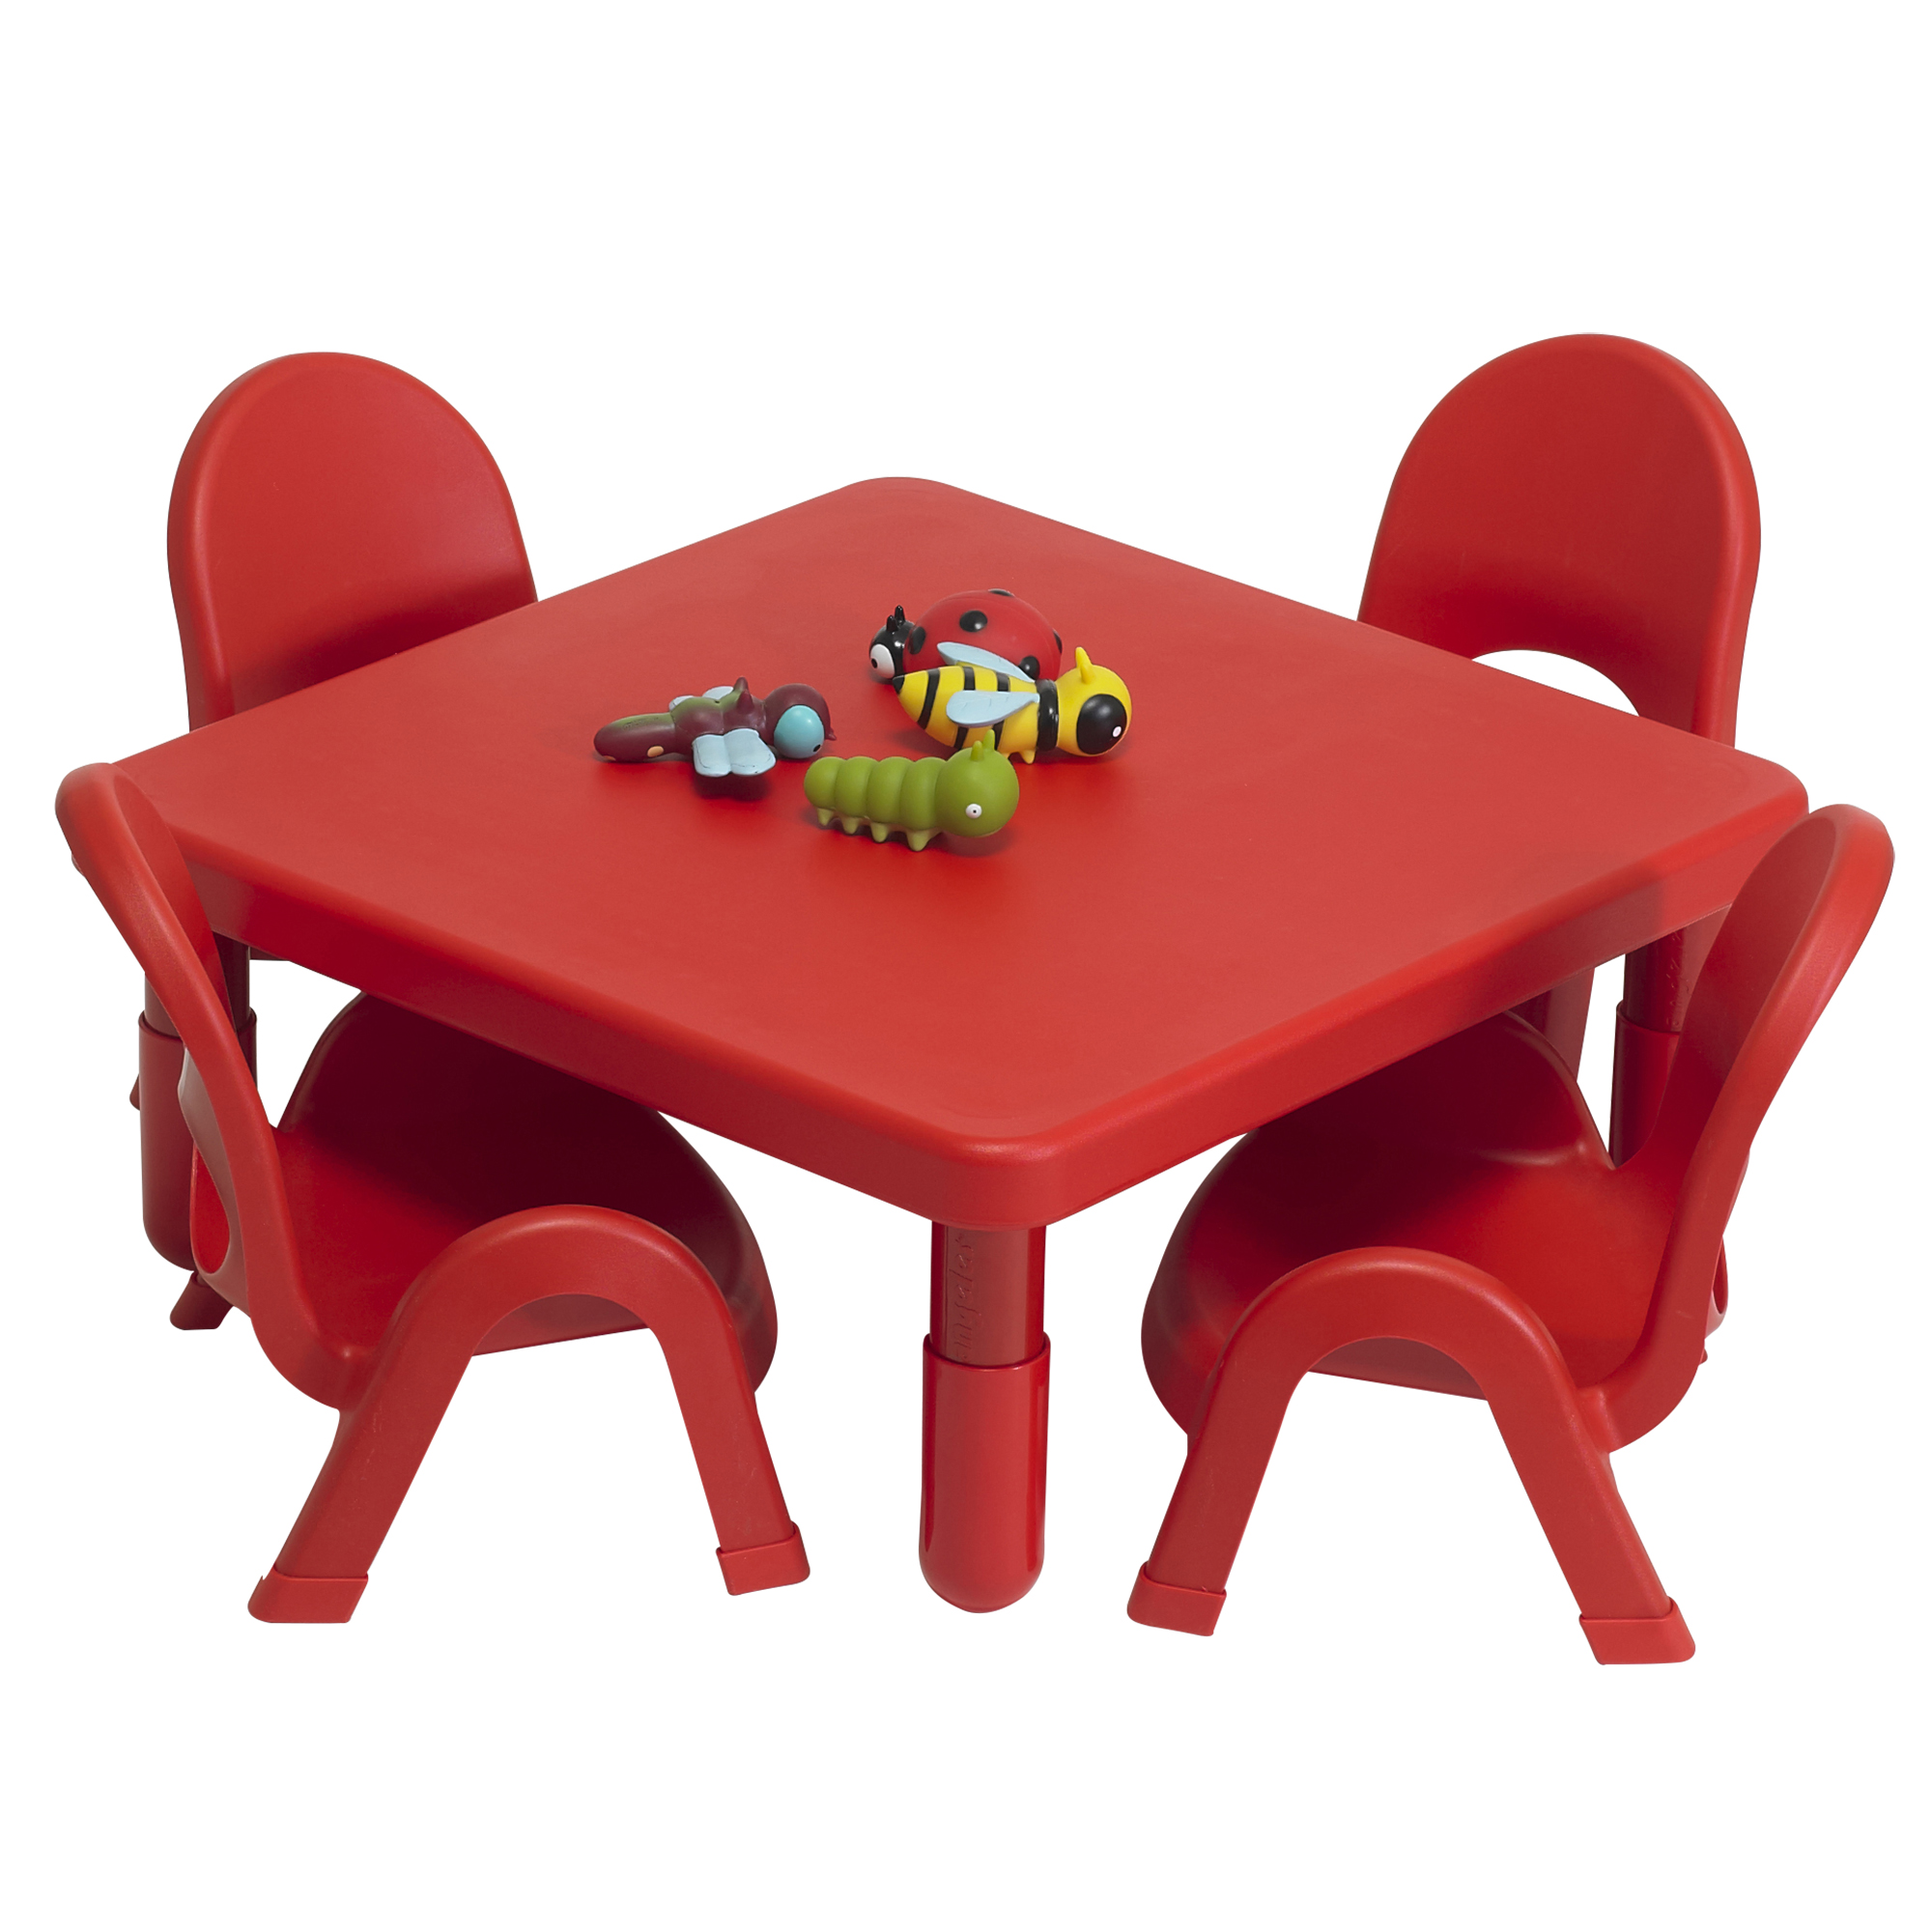 Toddler MyValue™ Set 4 Square - Candy Apple Red